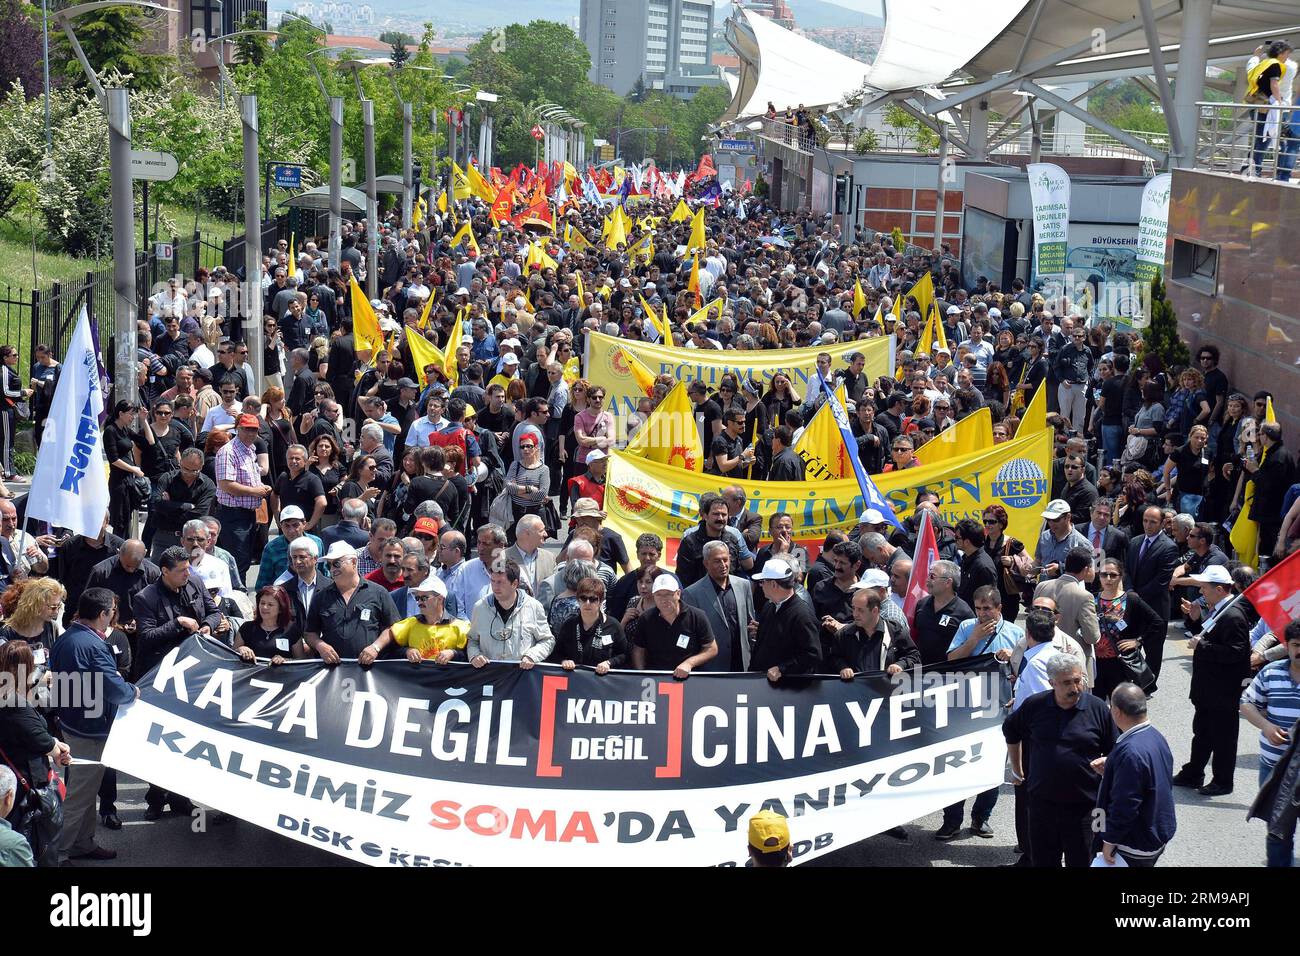 (140515) -- ANKARA, May 15, 2014 (Xinhua) -- People attend a protest in Ankara, May 15, 2014. A protest erupted in Turkey s capital on Thursday, demanding the government to resign for the responsibility of the Soma mine blast.(Xinhua/Mustafa Kaya) TURKEY-ANKARA-SOMA MINE-PROTEST PUBLICATIONxNOTxINxCHN   Ankara May 15 2014 XINHUA Celebrities attend a Protest in Ankara May 15 2014 a Protest erupted in Turkey S Capital ON Thursday demanding The Government to RESIGN for The Responsibility of The Soma Mine Blast XINHUA Mustafa Kaya Turkey Ankara Soma Mine Protest PUBLICATIONxNOTxINxCHN Stock Photo